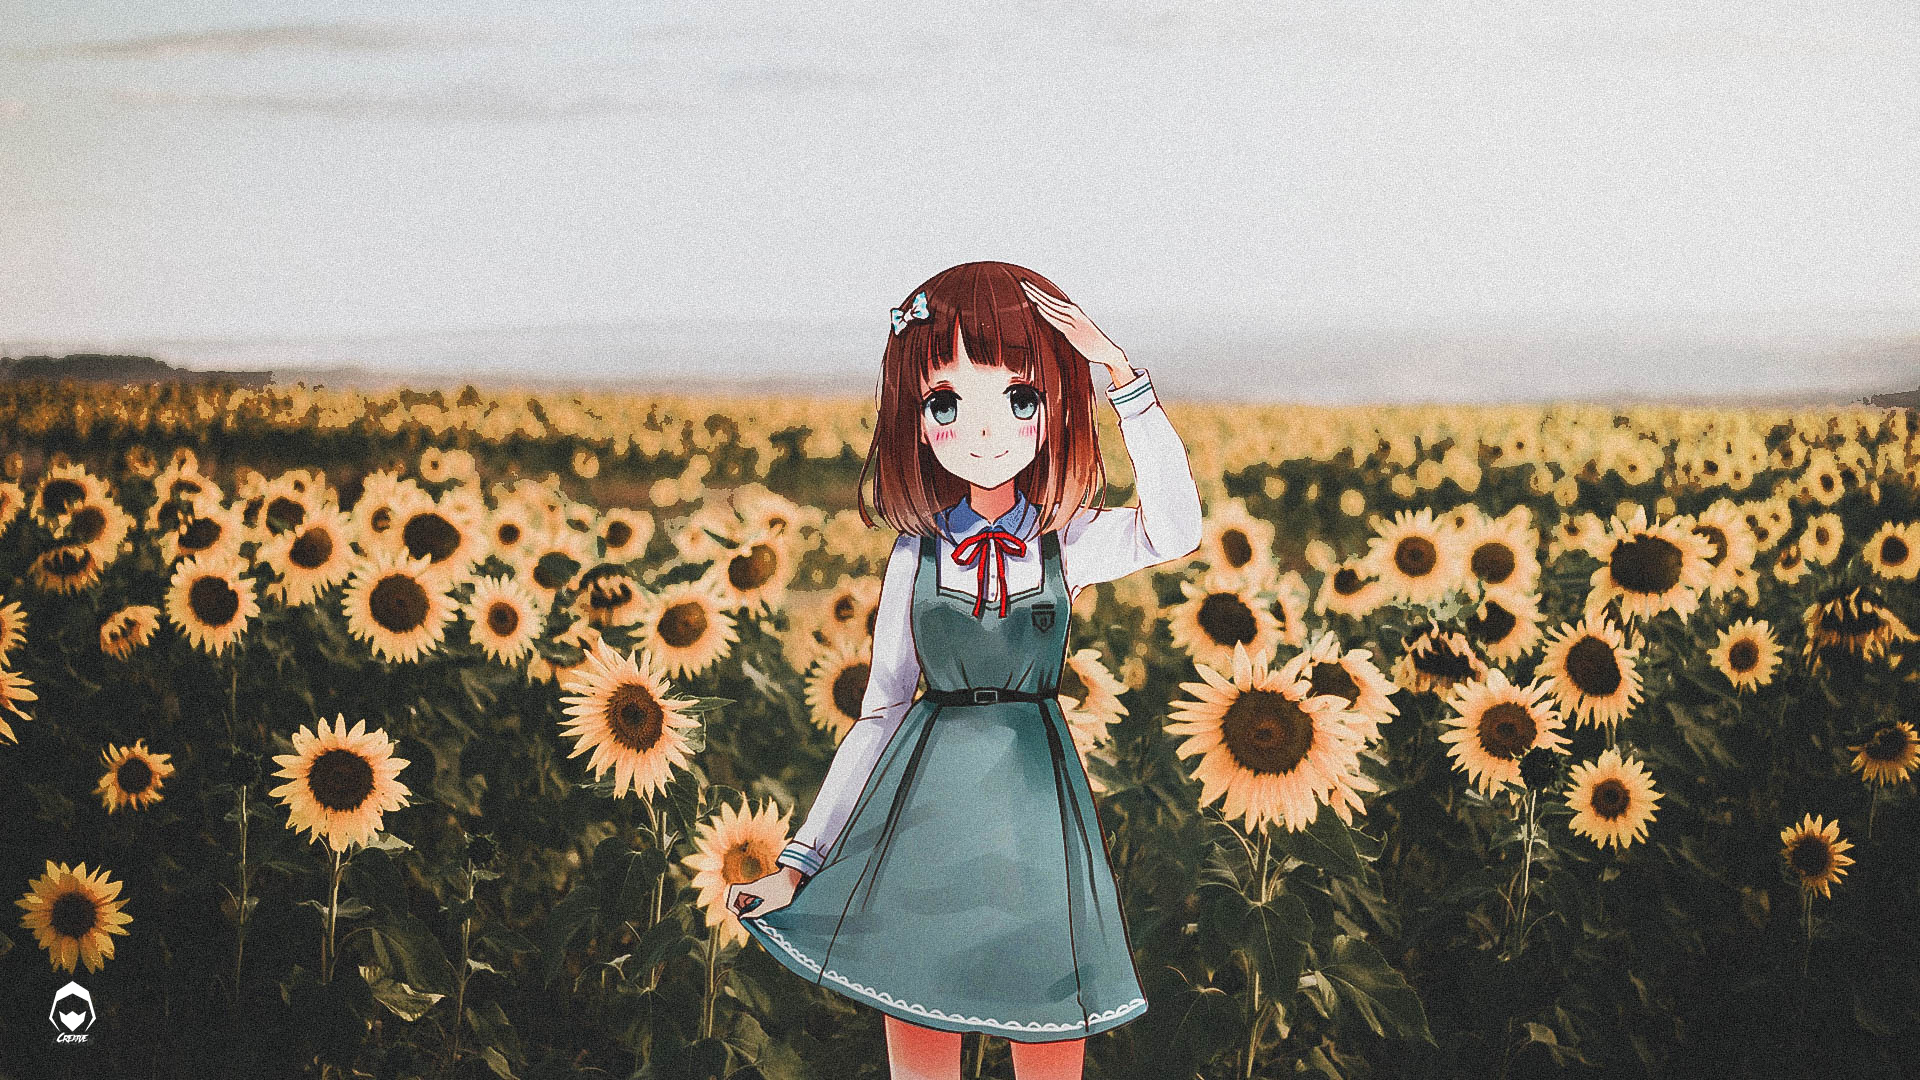 Wallpaper : 2D, anime girls, picture in picture, MeaningJun, sunflowers,  sunset 2560x1440 - leandroc - 1727859 - HD Wallpapers - WallHere